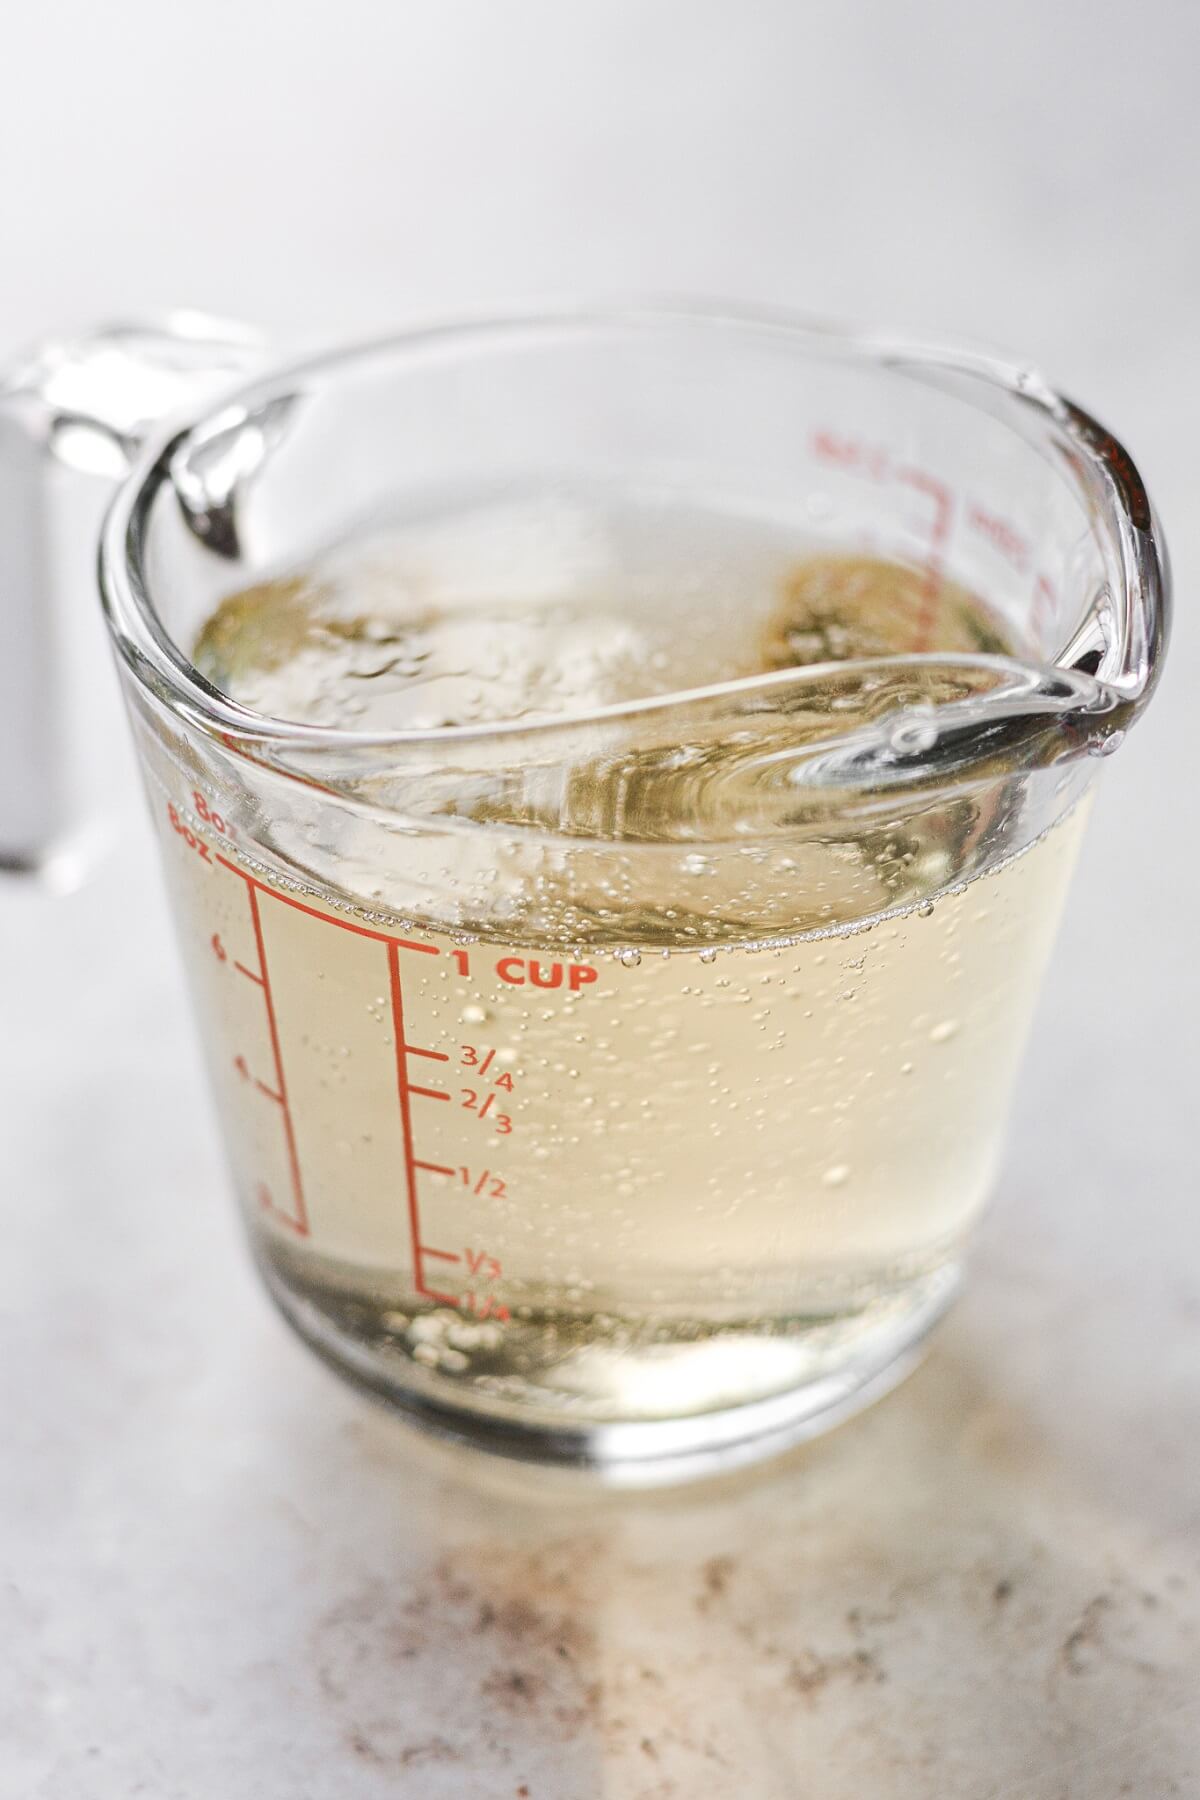 Champagne in a glass measuring cup.